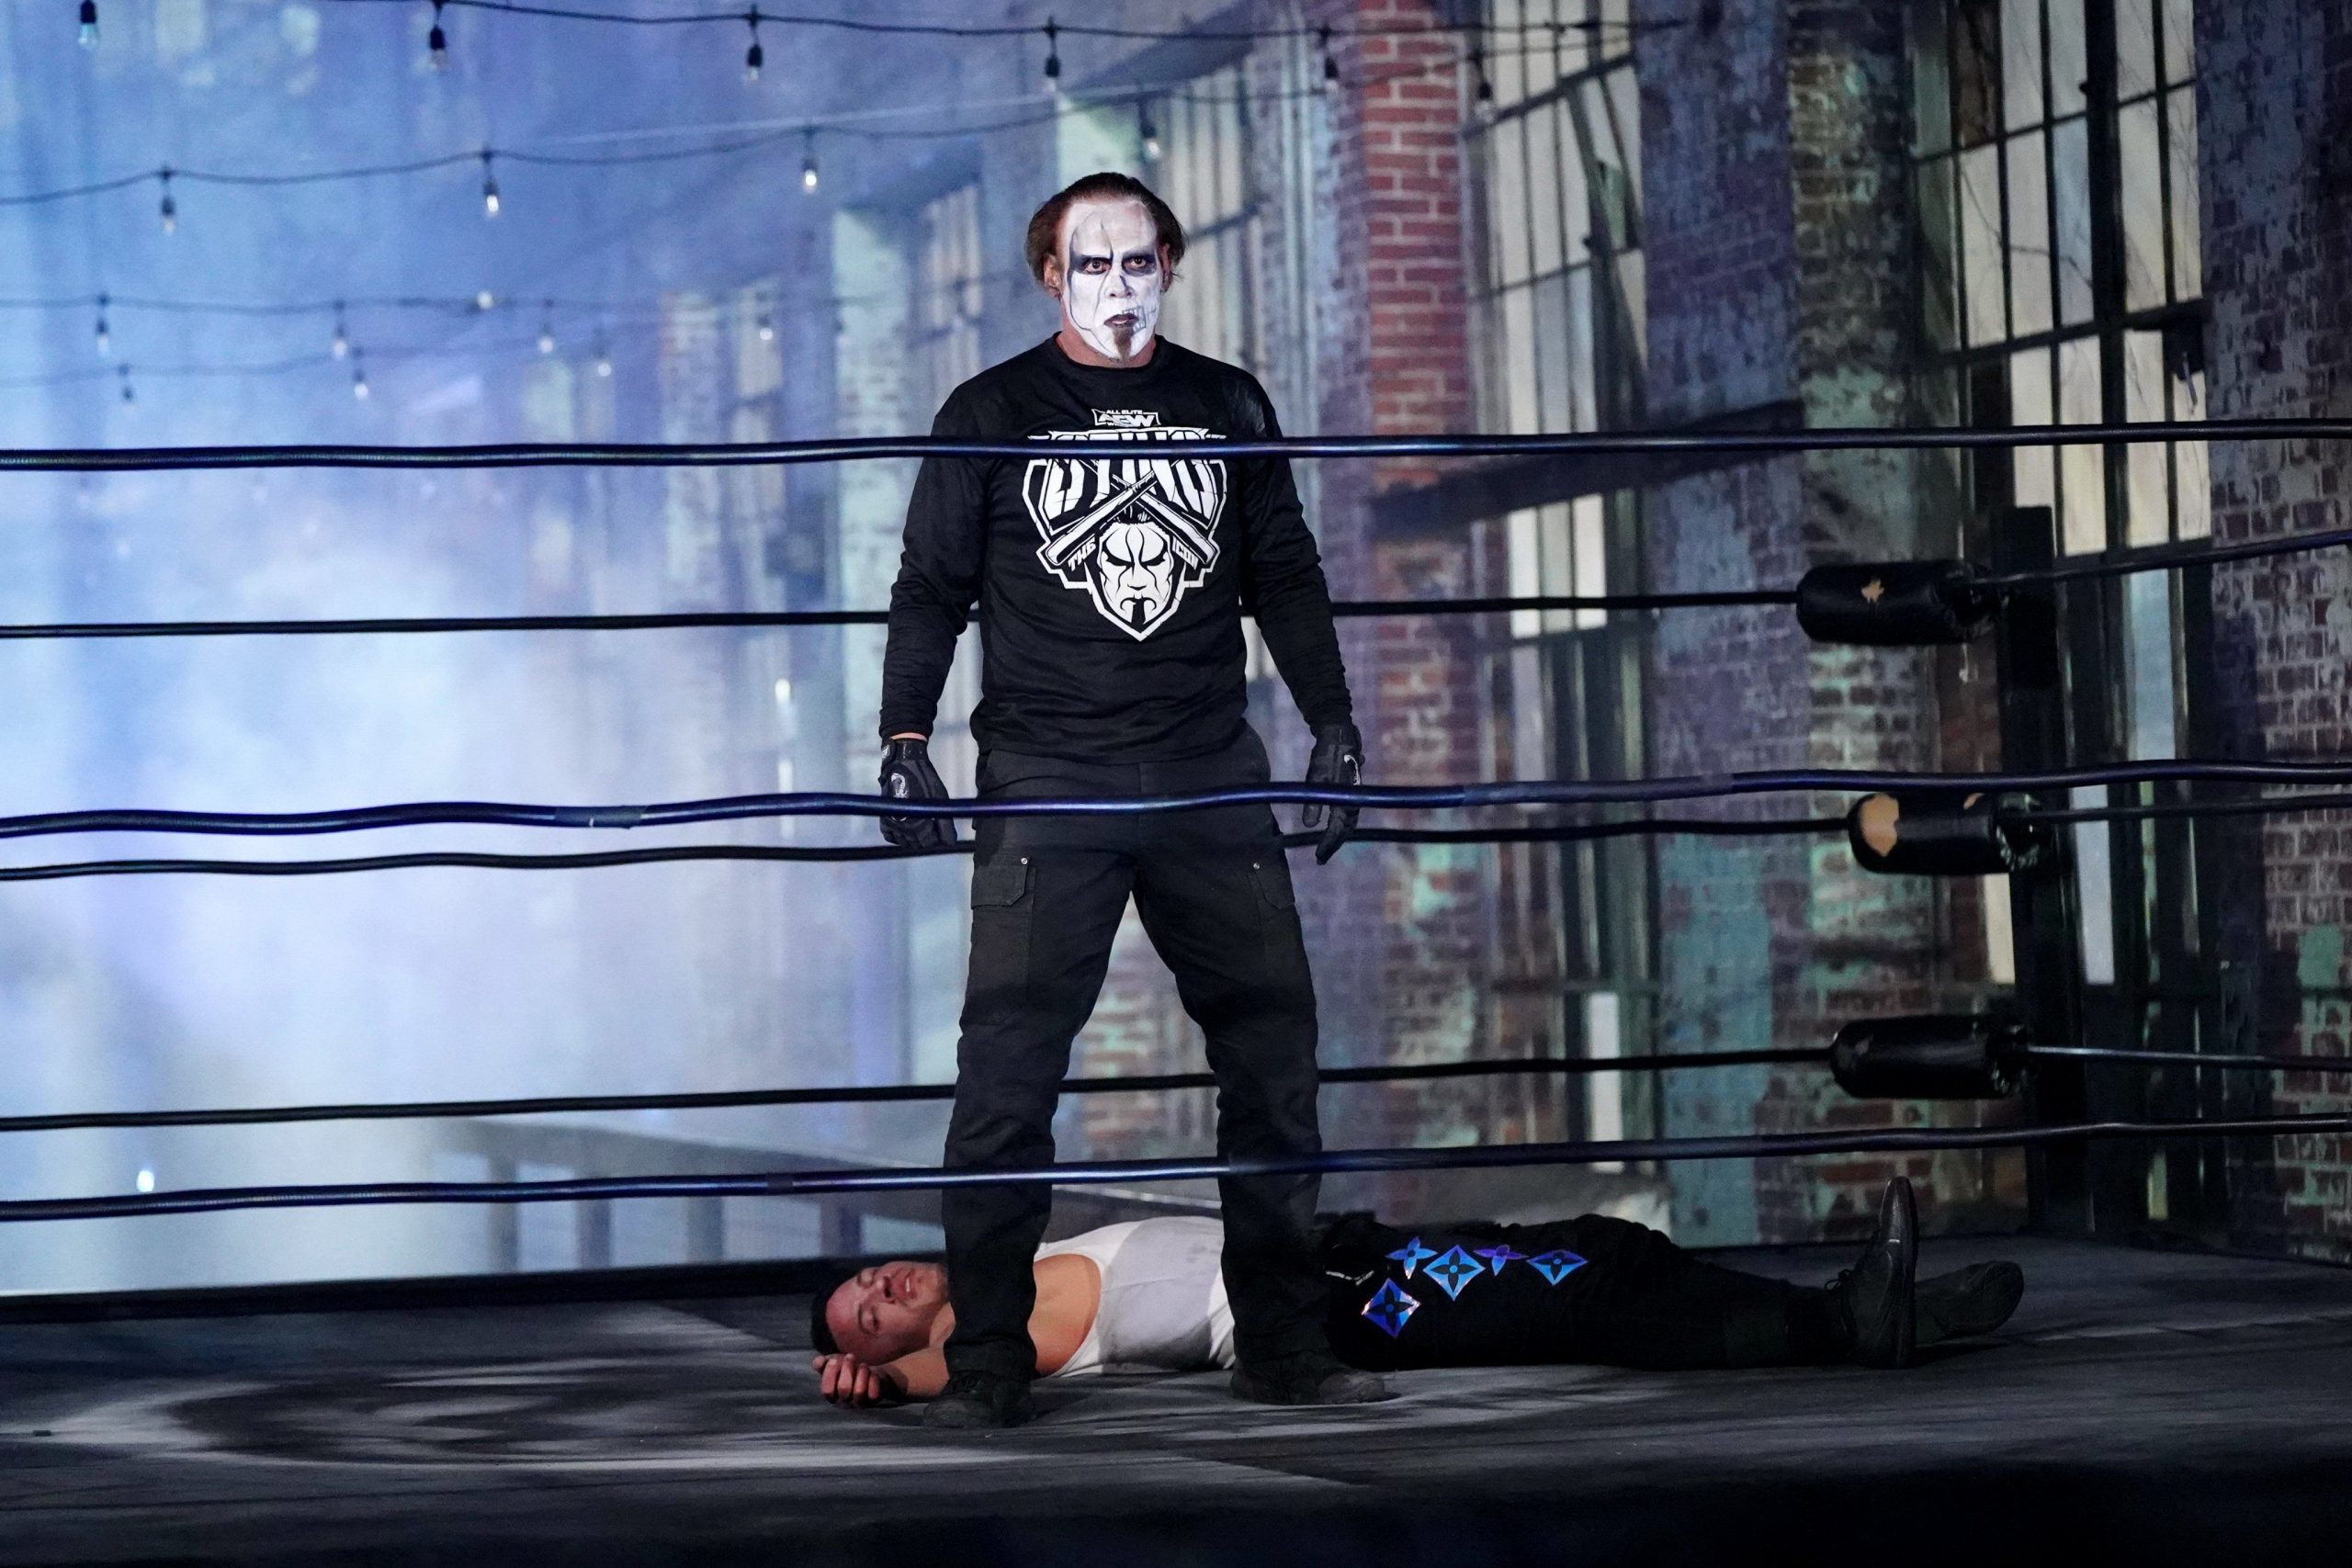 WCW icon Sting returns on the TNT network after nearly two decades